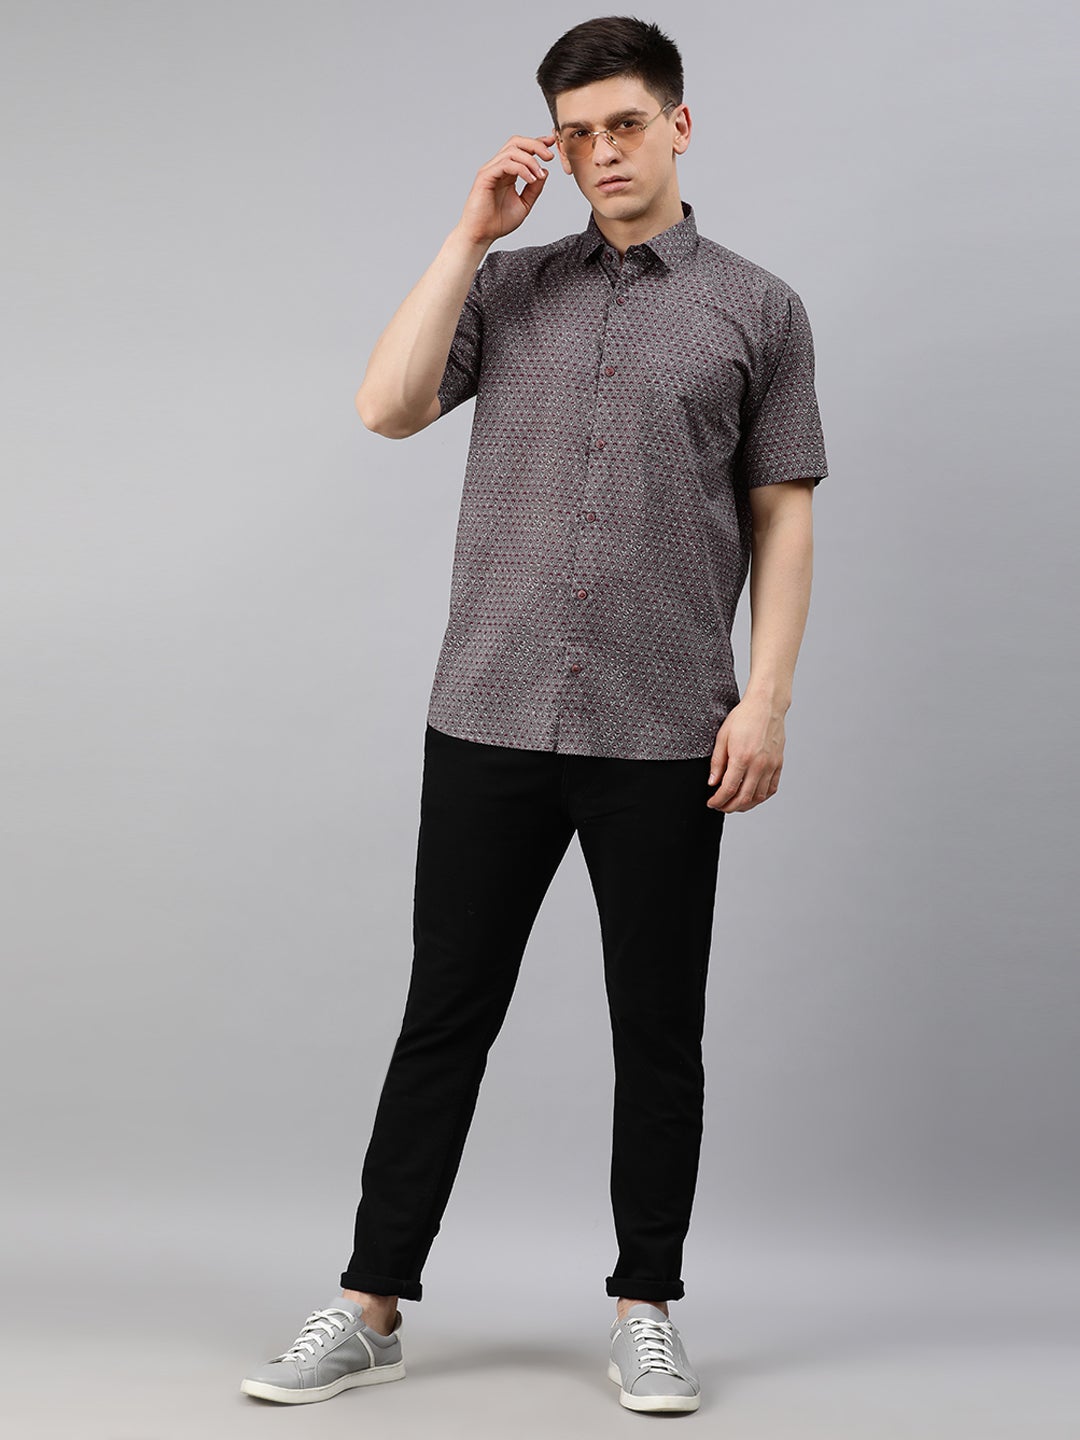 Gray Cotton Short Sleeves Shirts For Men